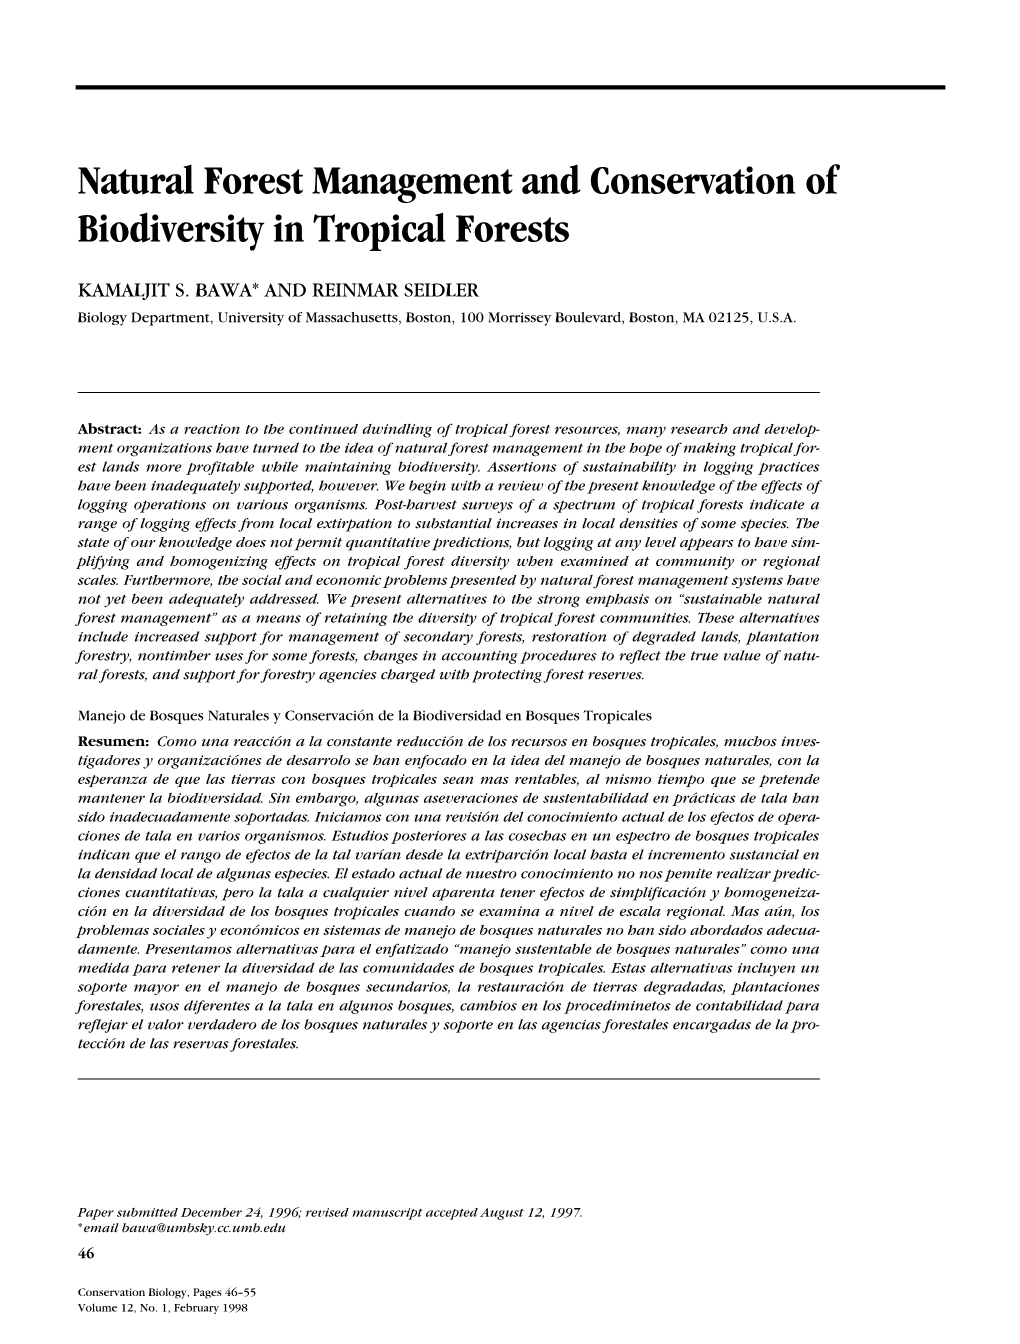 Natural Forest Management and Conservation of Biodiversity in Tropical Forests